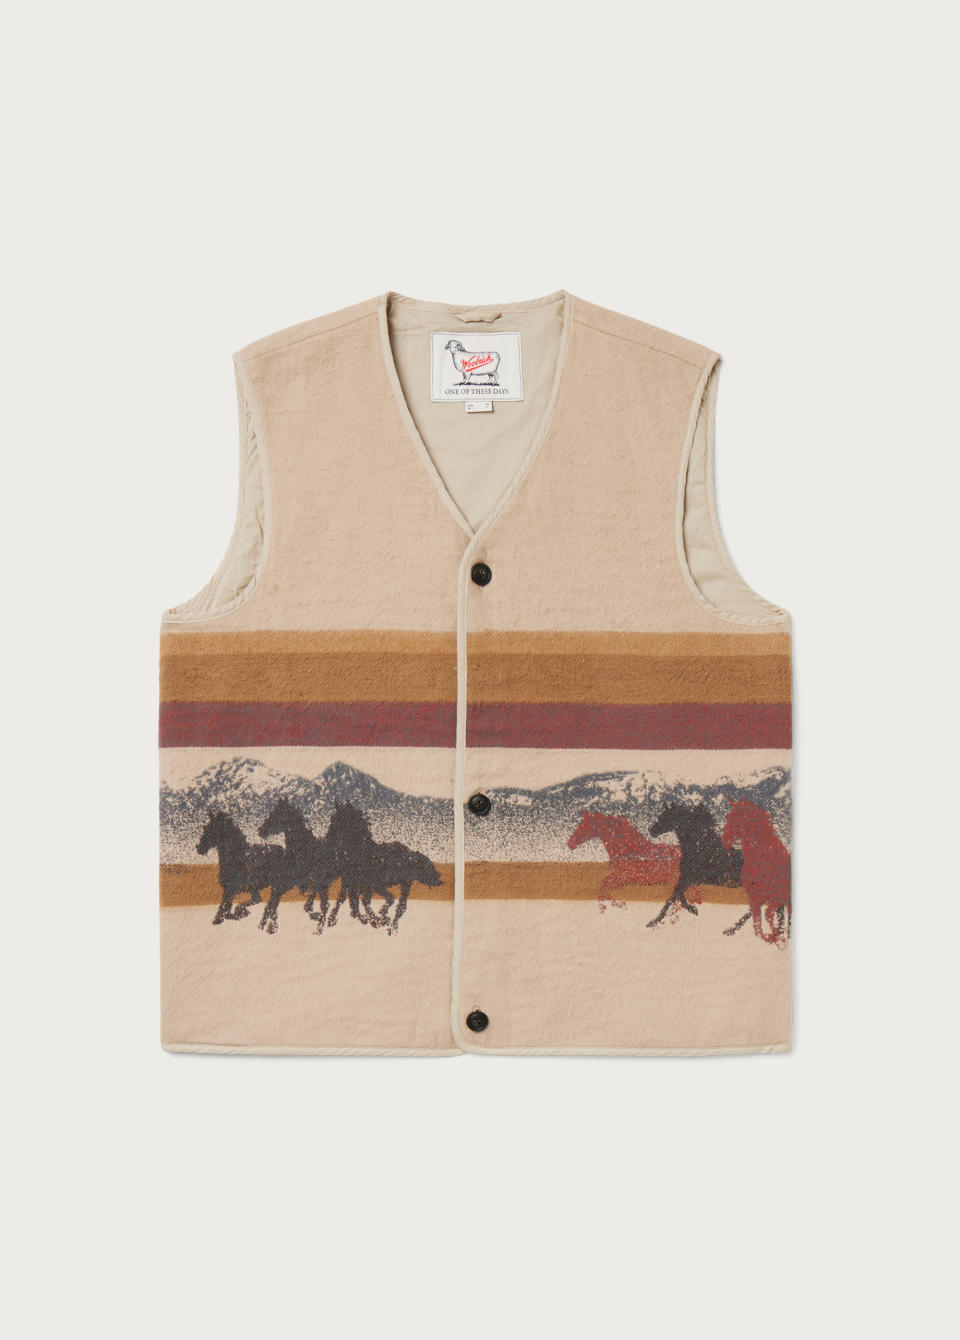 A vest from the One of These Days x Woolrich capsule collection.